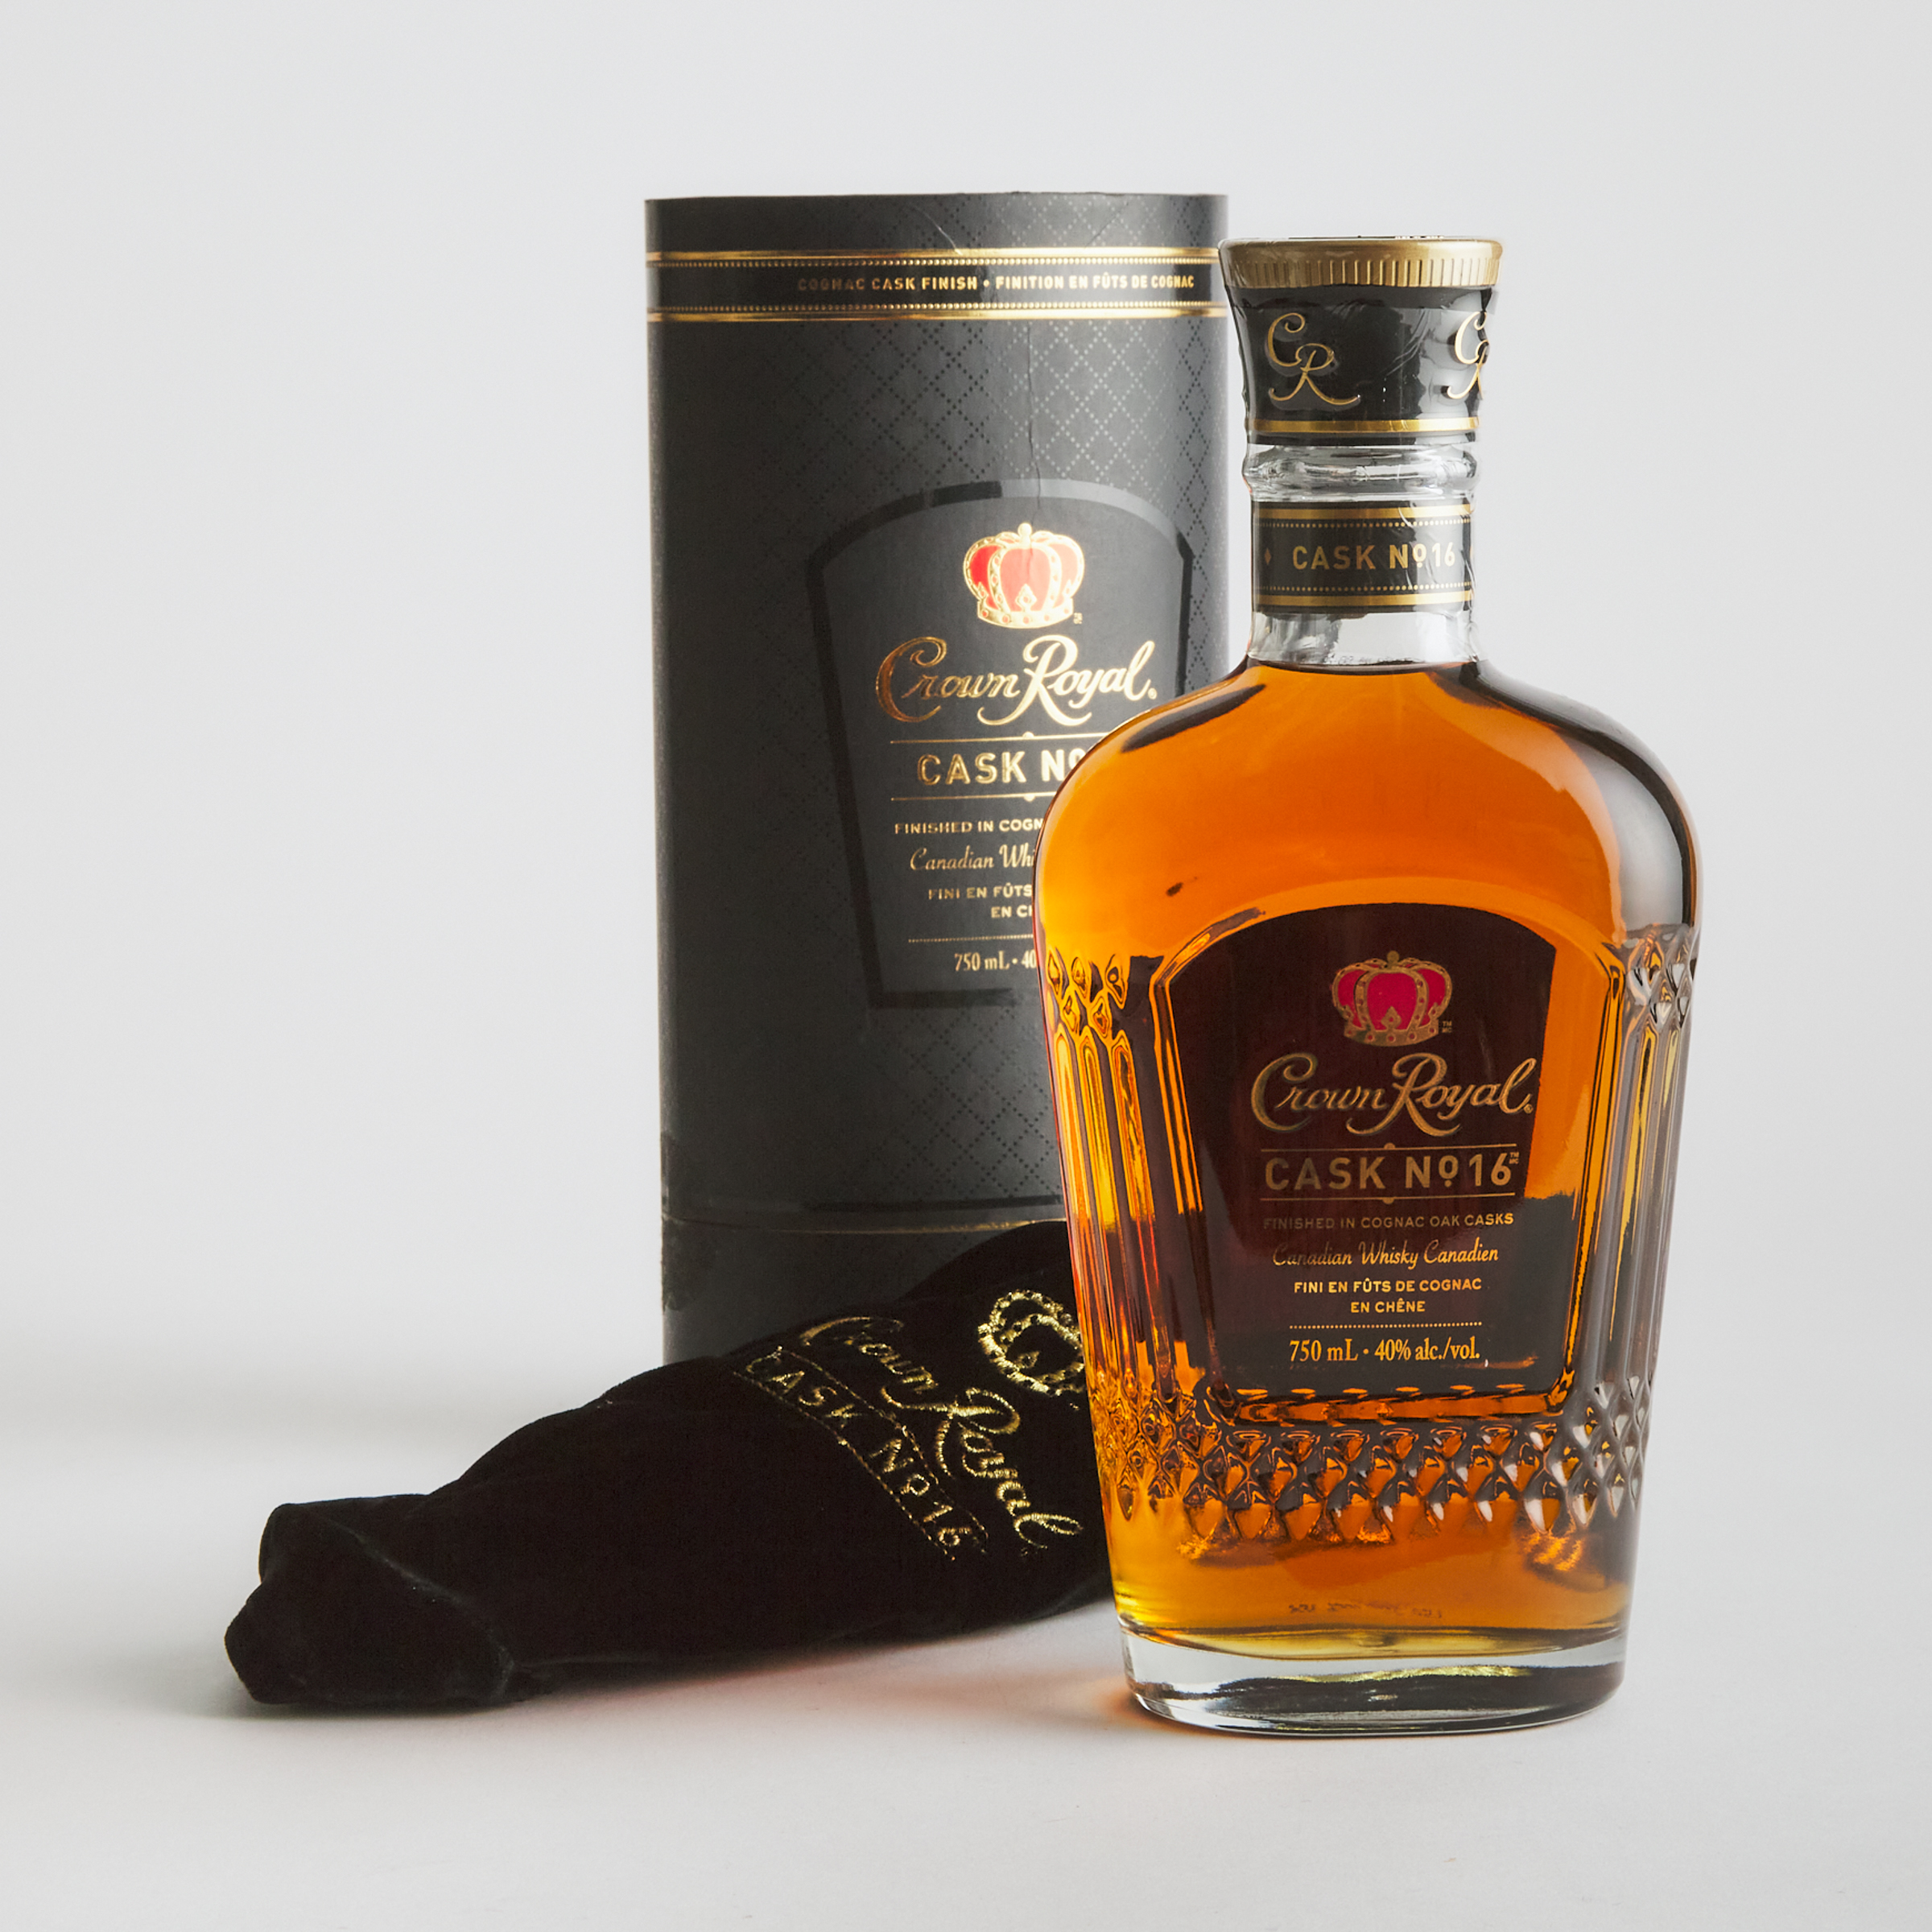 CROWN ROYAL BLENDED CANADIAN WHISKY CASK NO 16 NAS (ONE 750 ML)